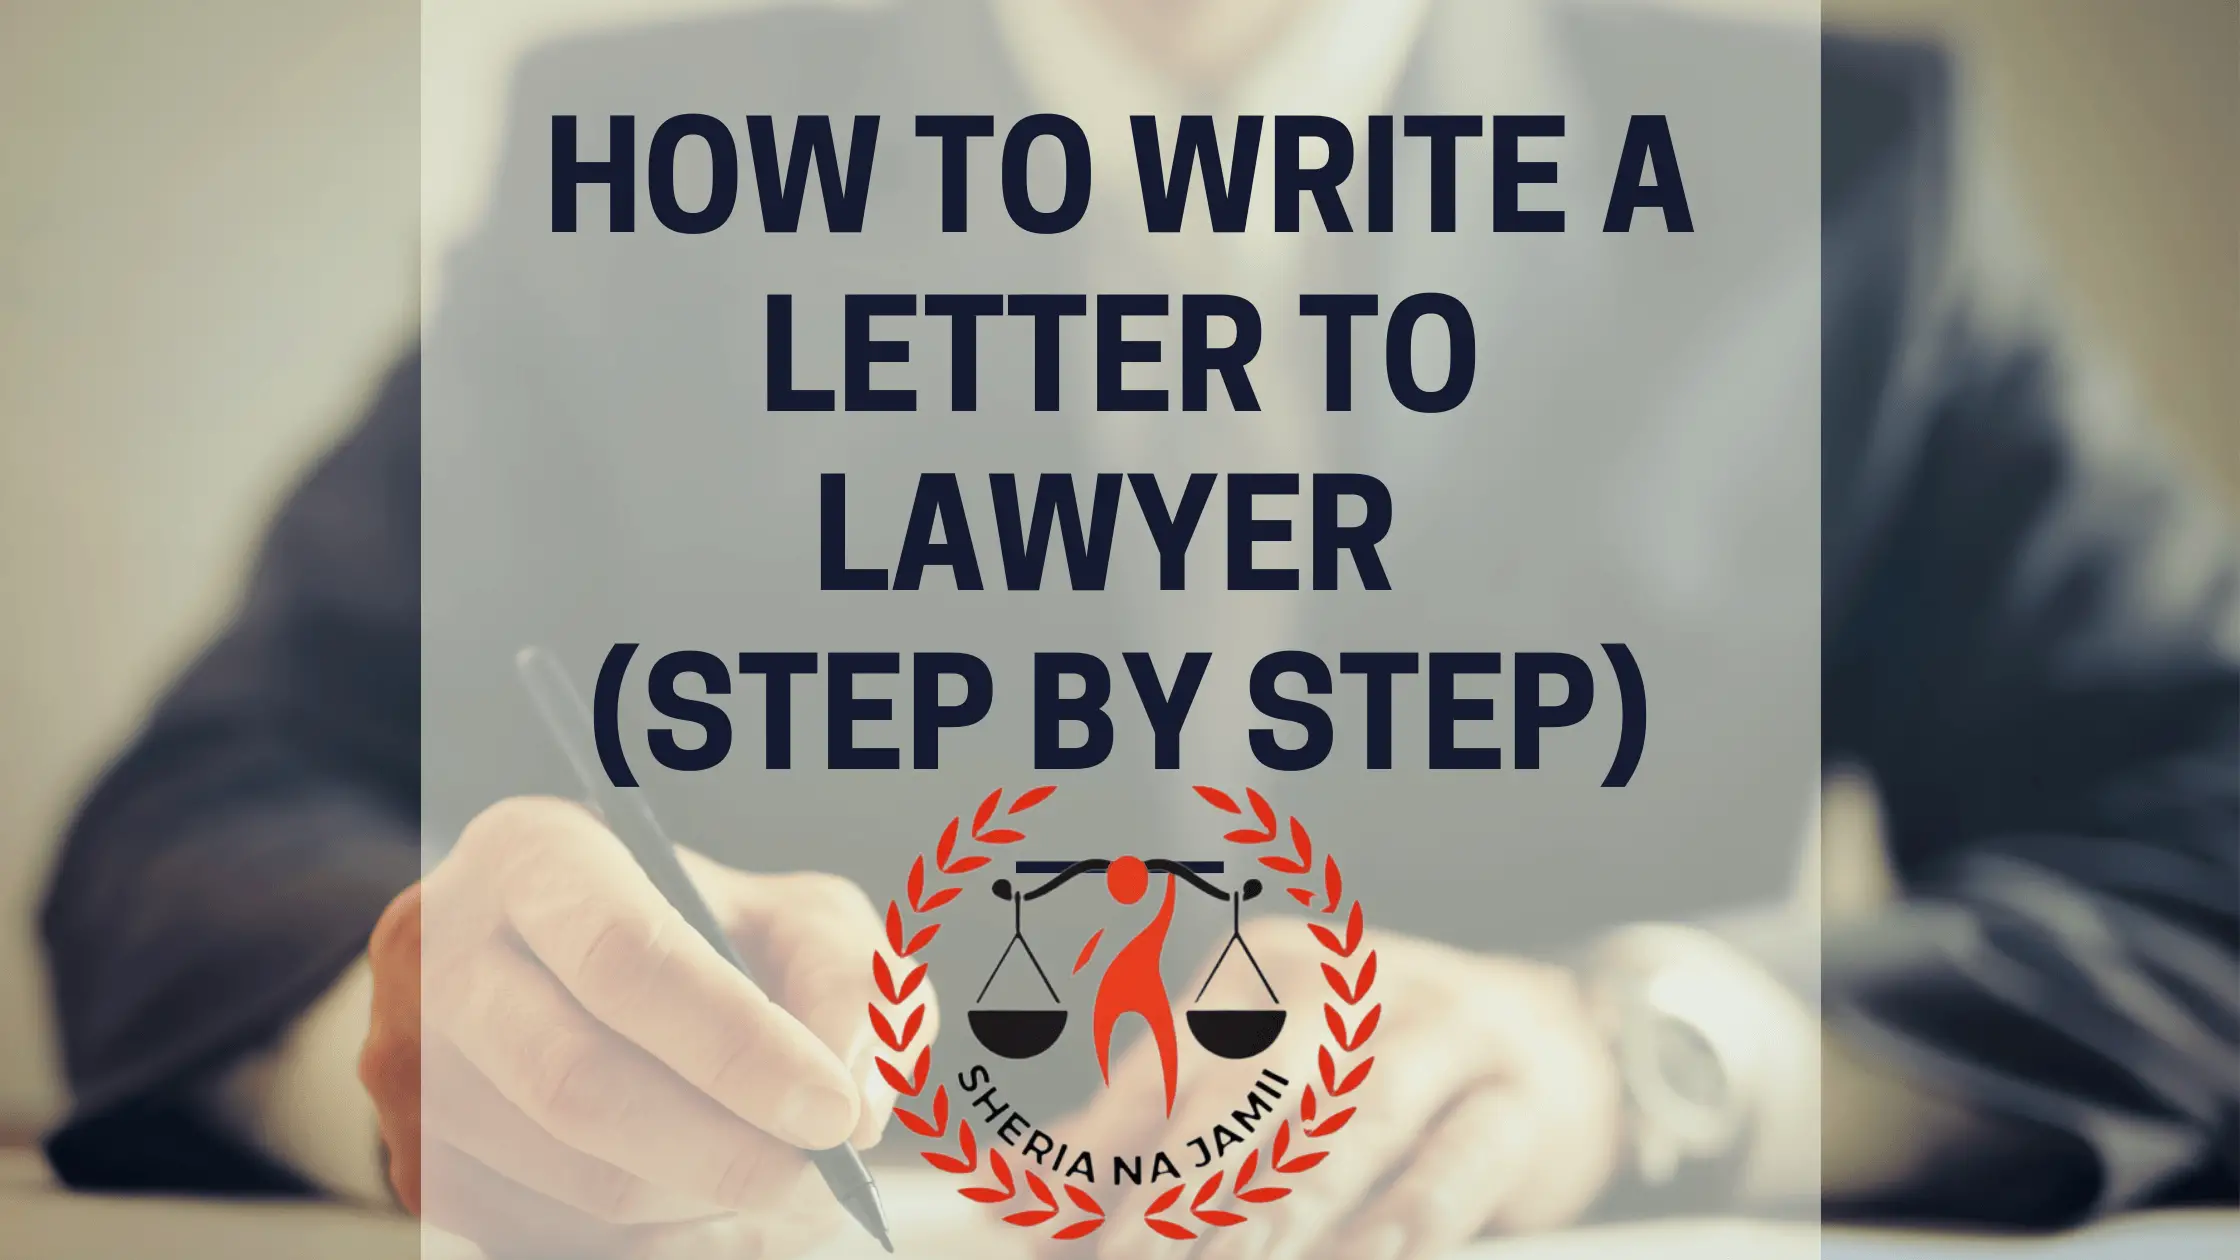 How to write a letter to lawyer (step by step)